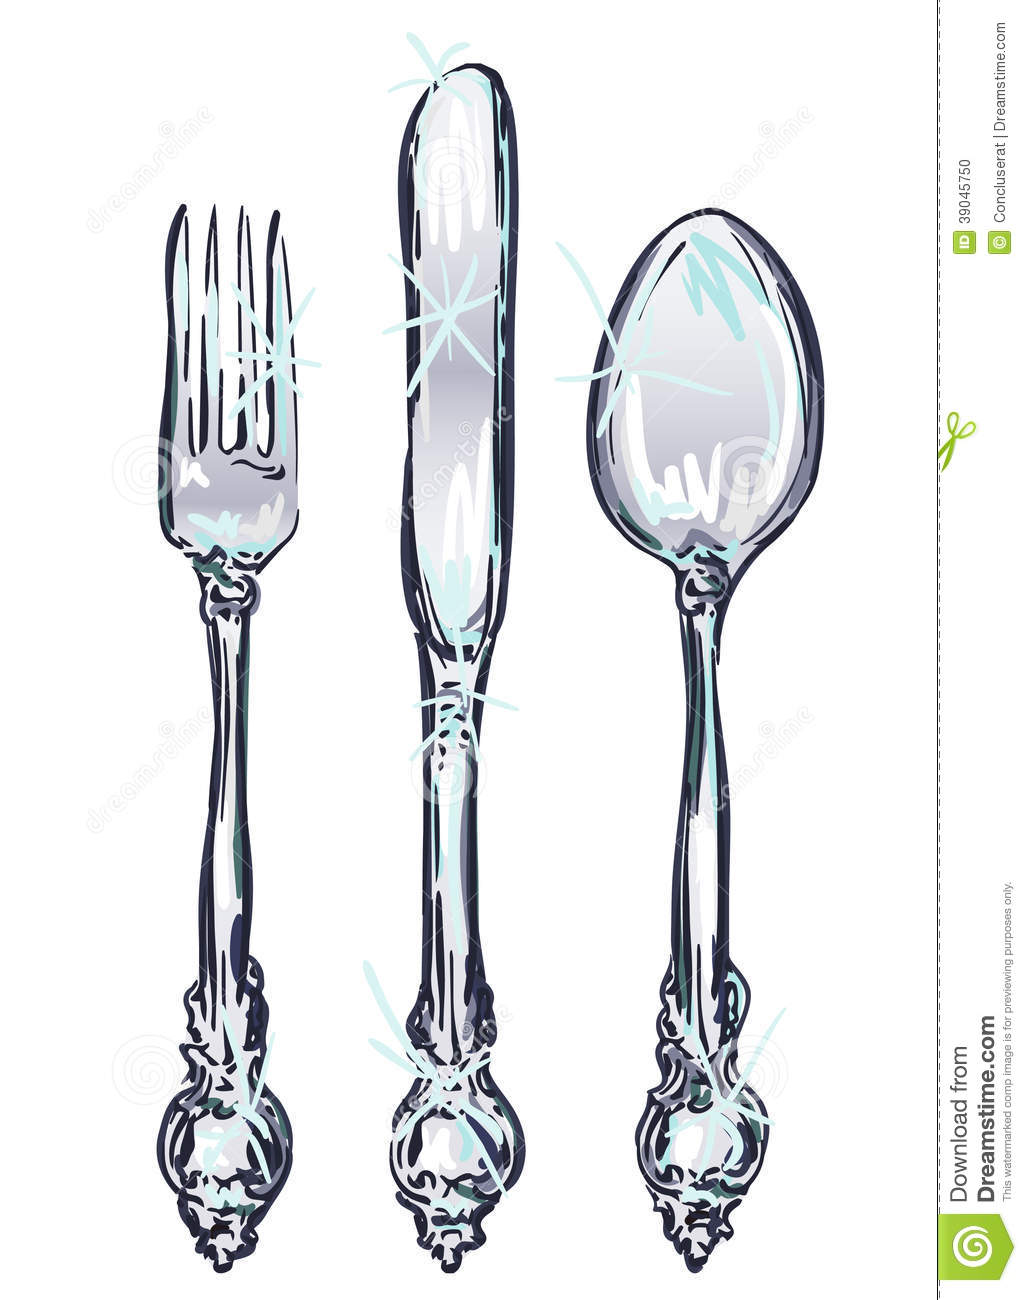 Silverware Clipart   Clipart Panda   Free Clipart Images